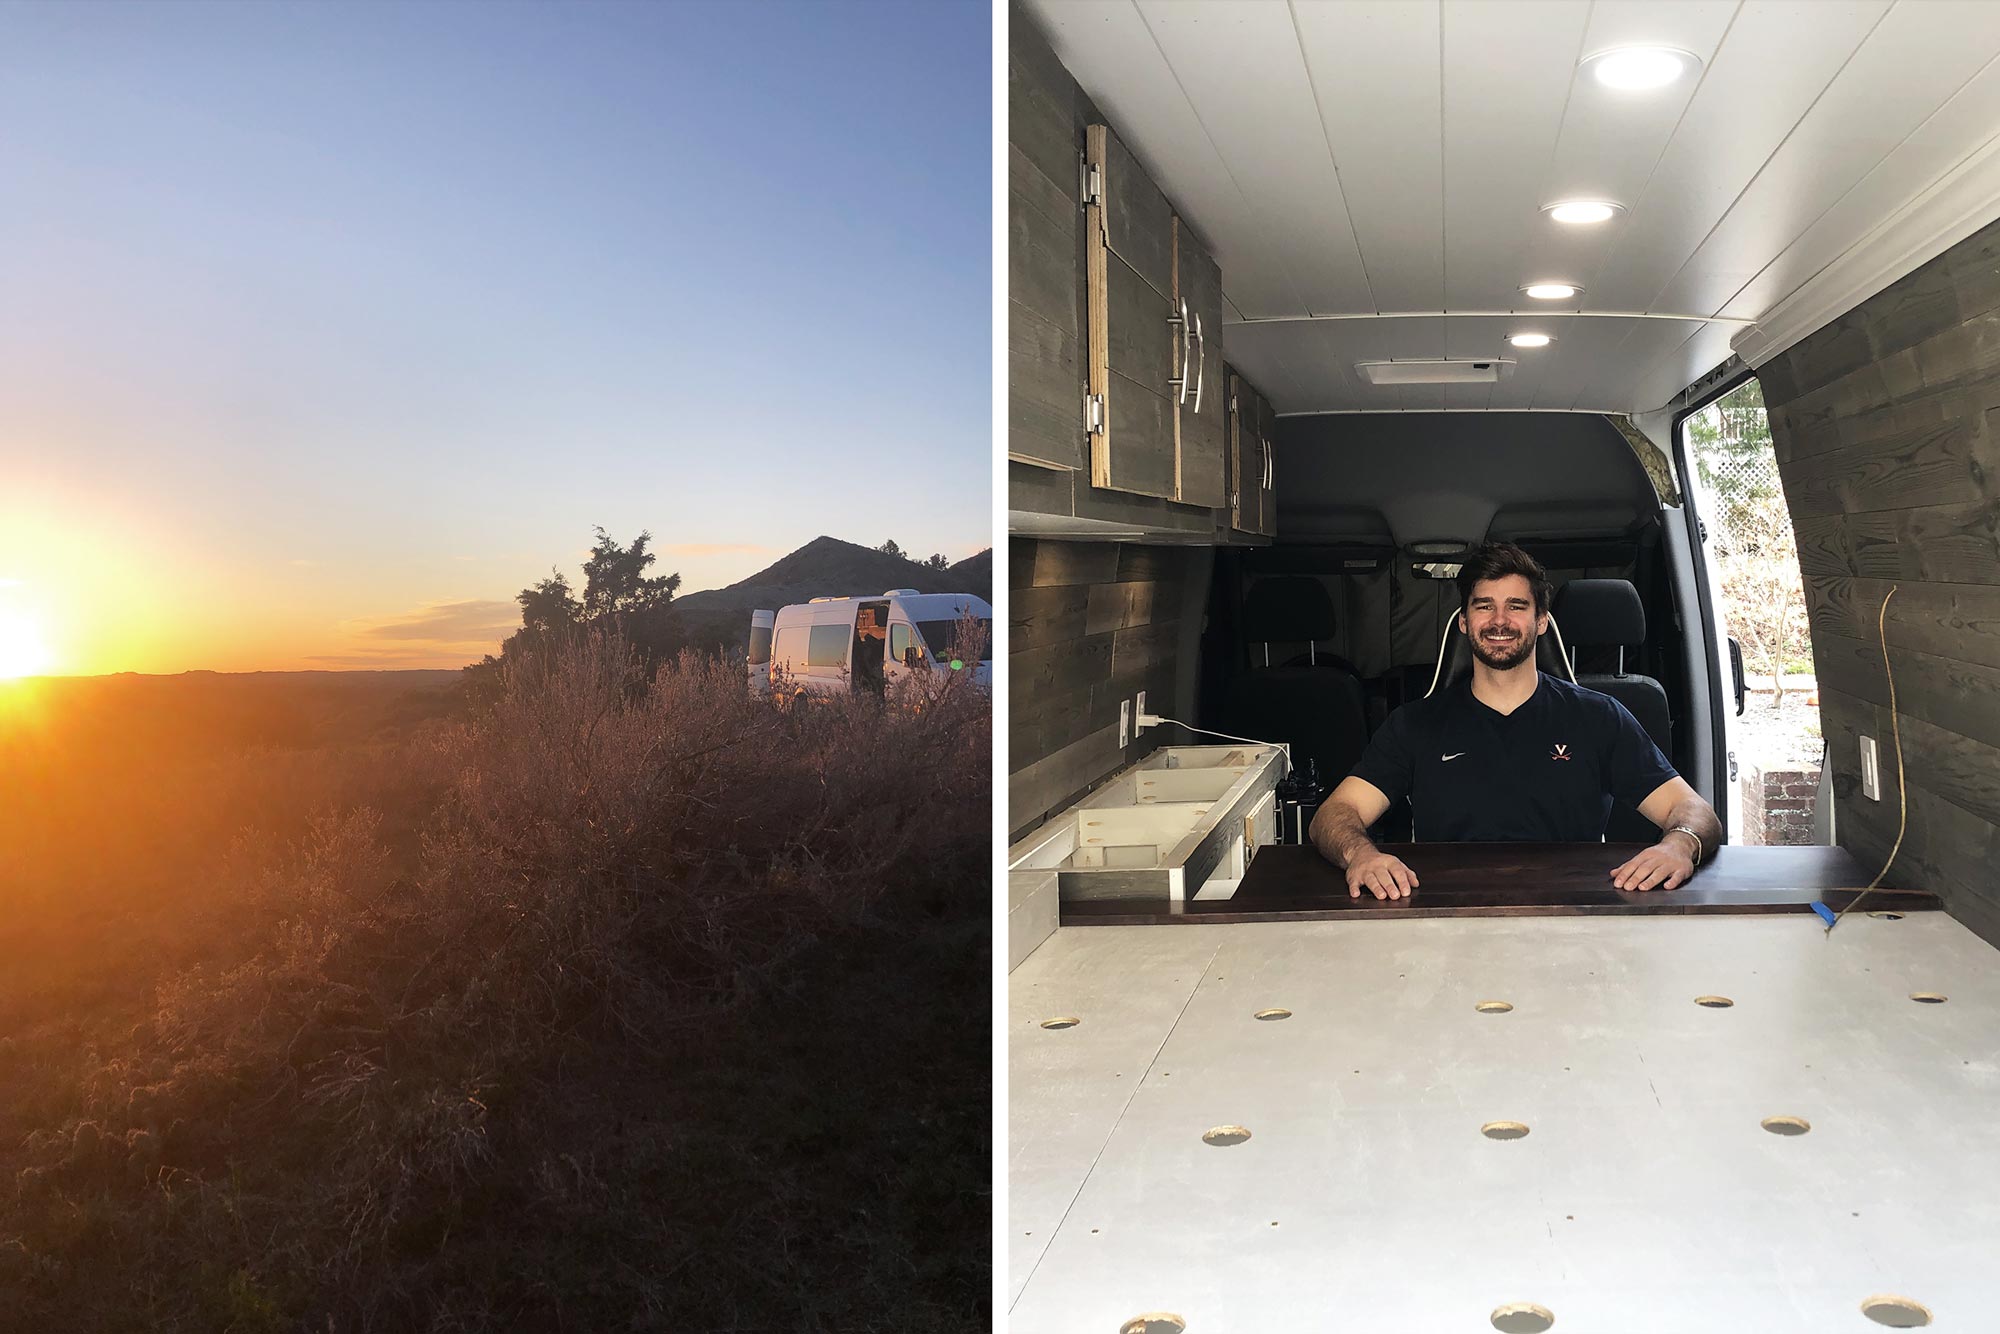 On the left, a photo of the van parked on an overlook at sunset. On the right, Pleško sits at his desk within the van as it's being built.